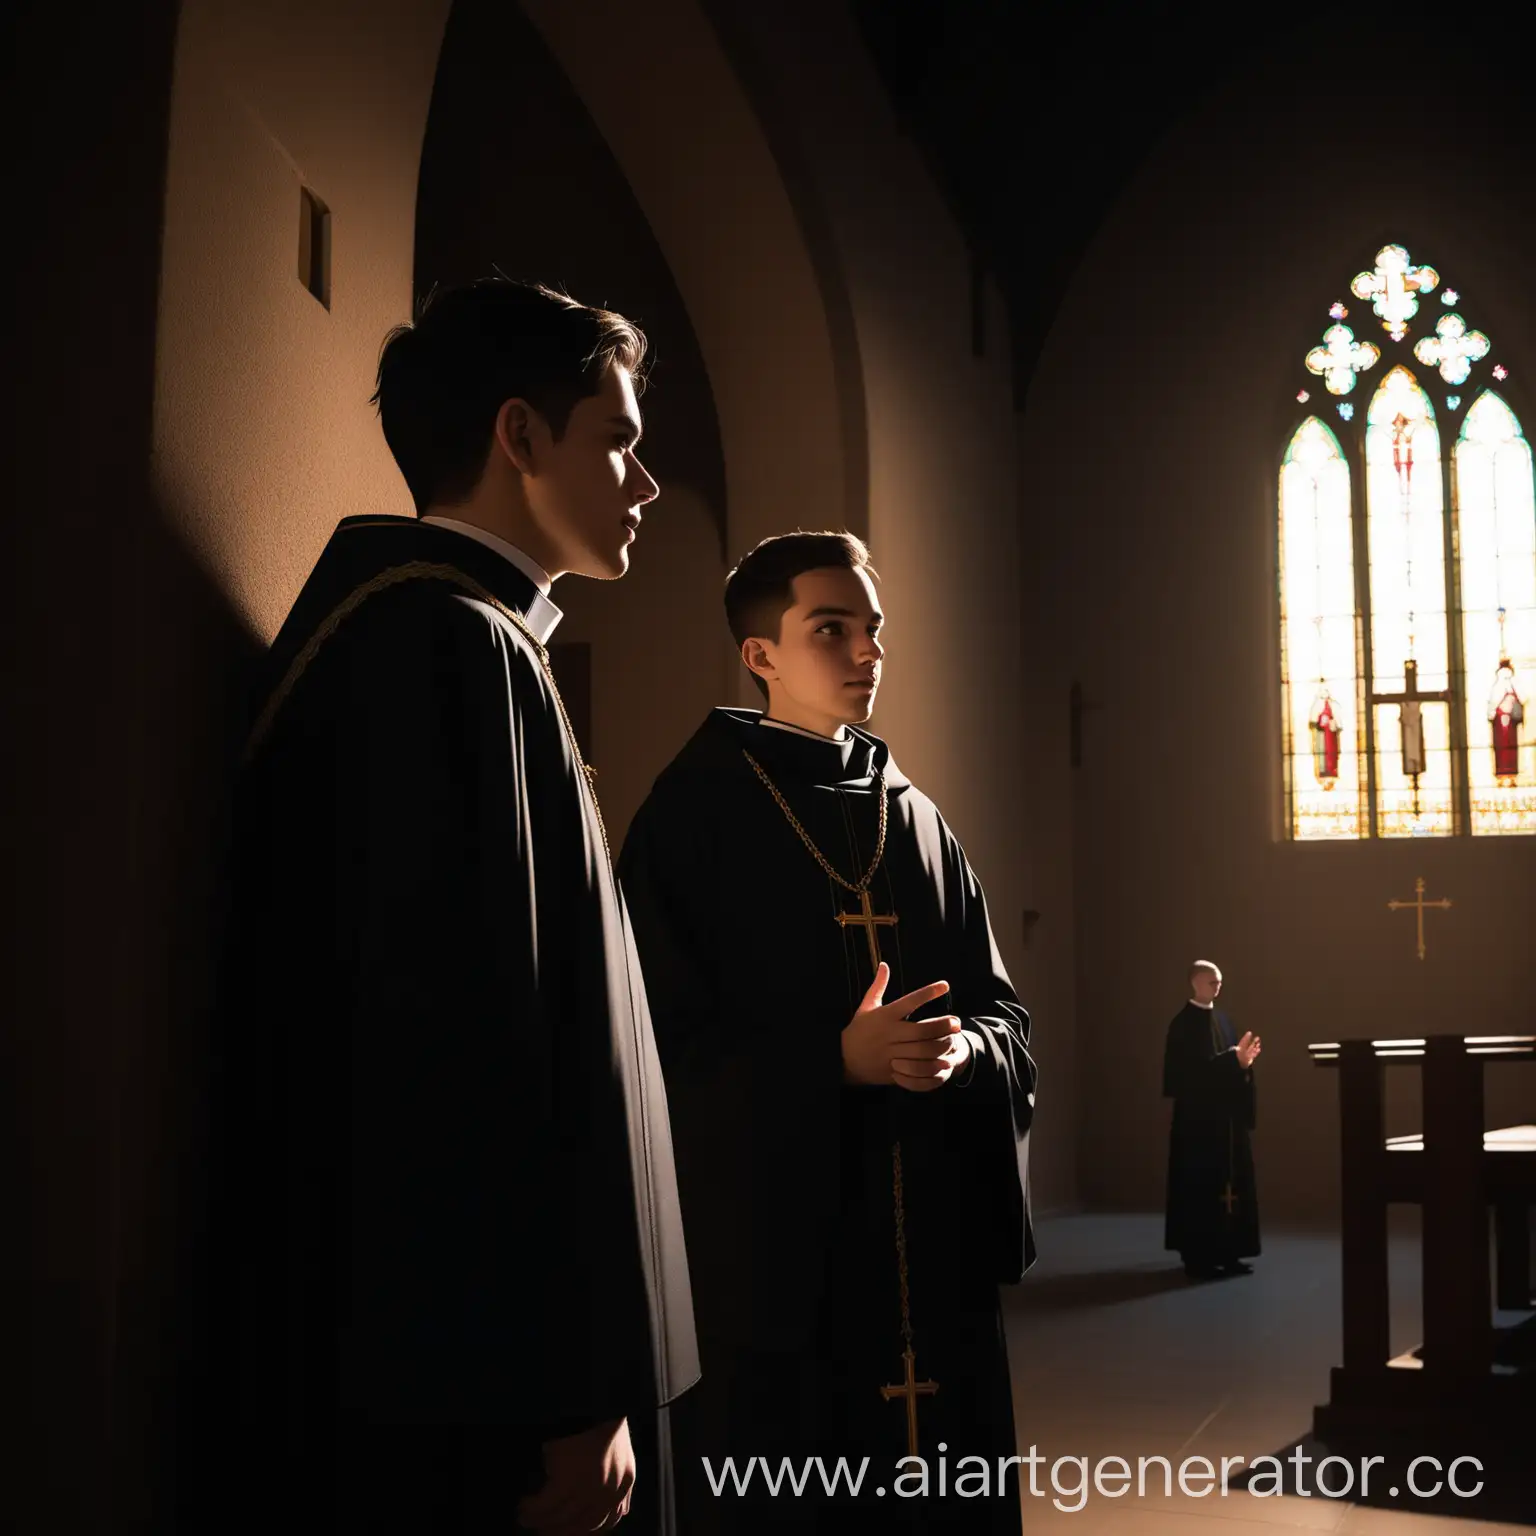 Discussion-Between-Young-Priests-in-Dim-Church-Corner